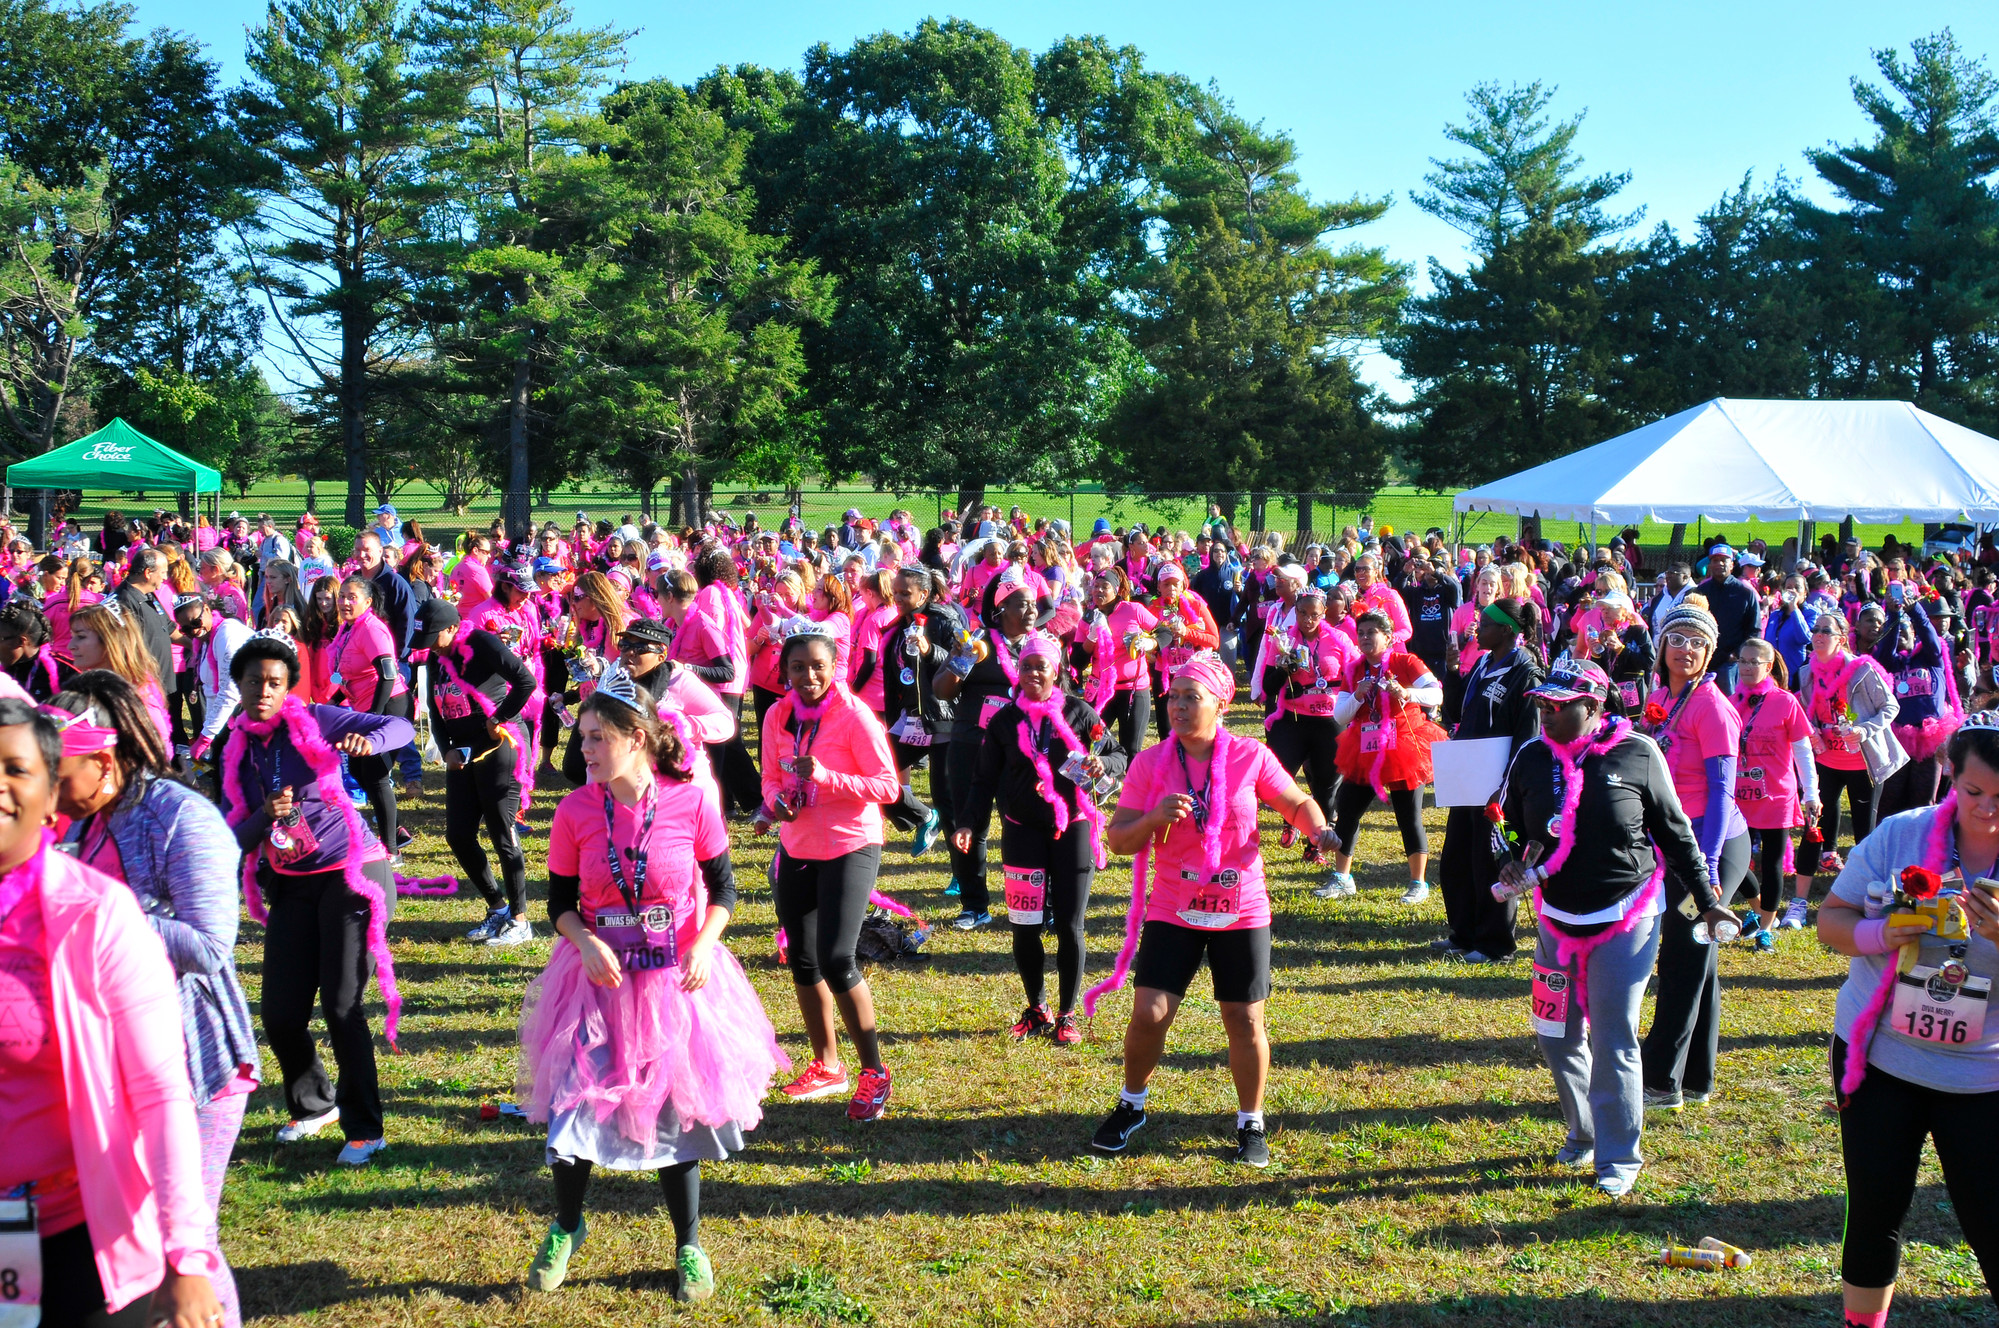 Participants of the Diva Run danced and celebrated the end of the race.